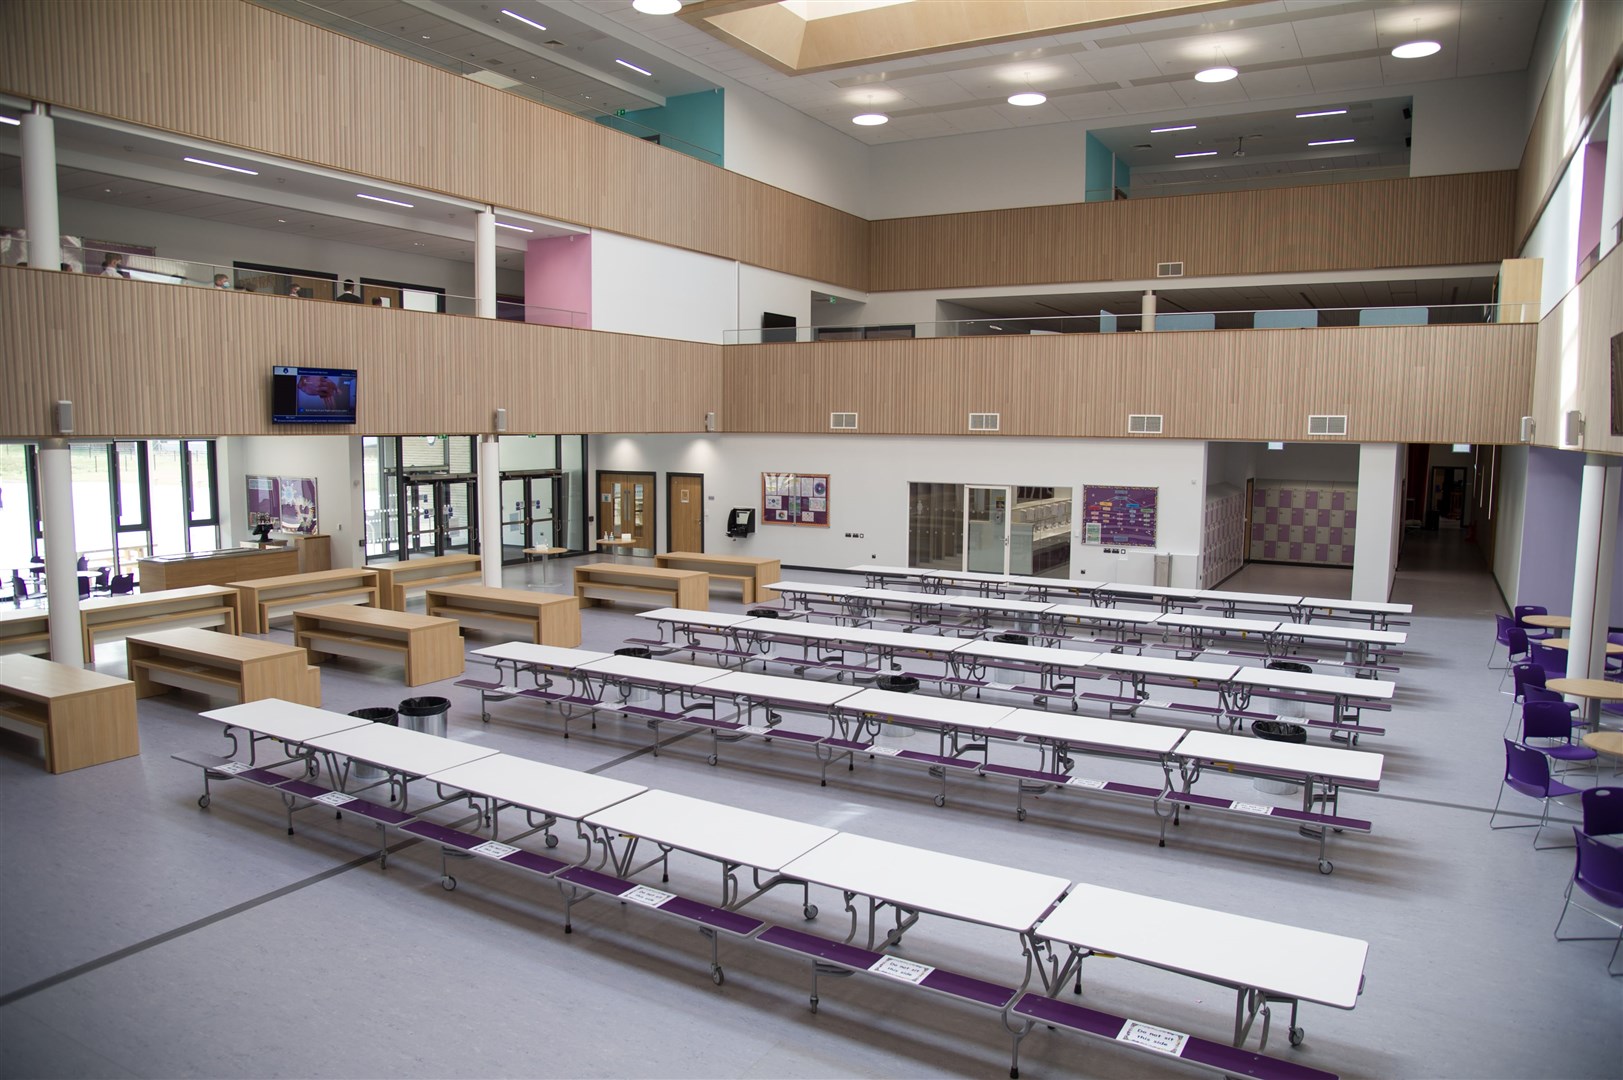 The central atrium at the heart of the new Lossiemouth High School. Picture: Becky Saunderson.